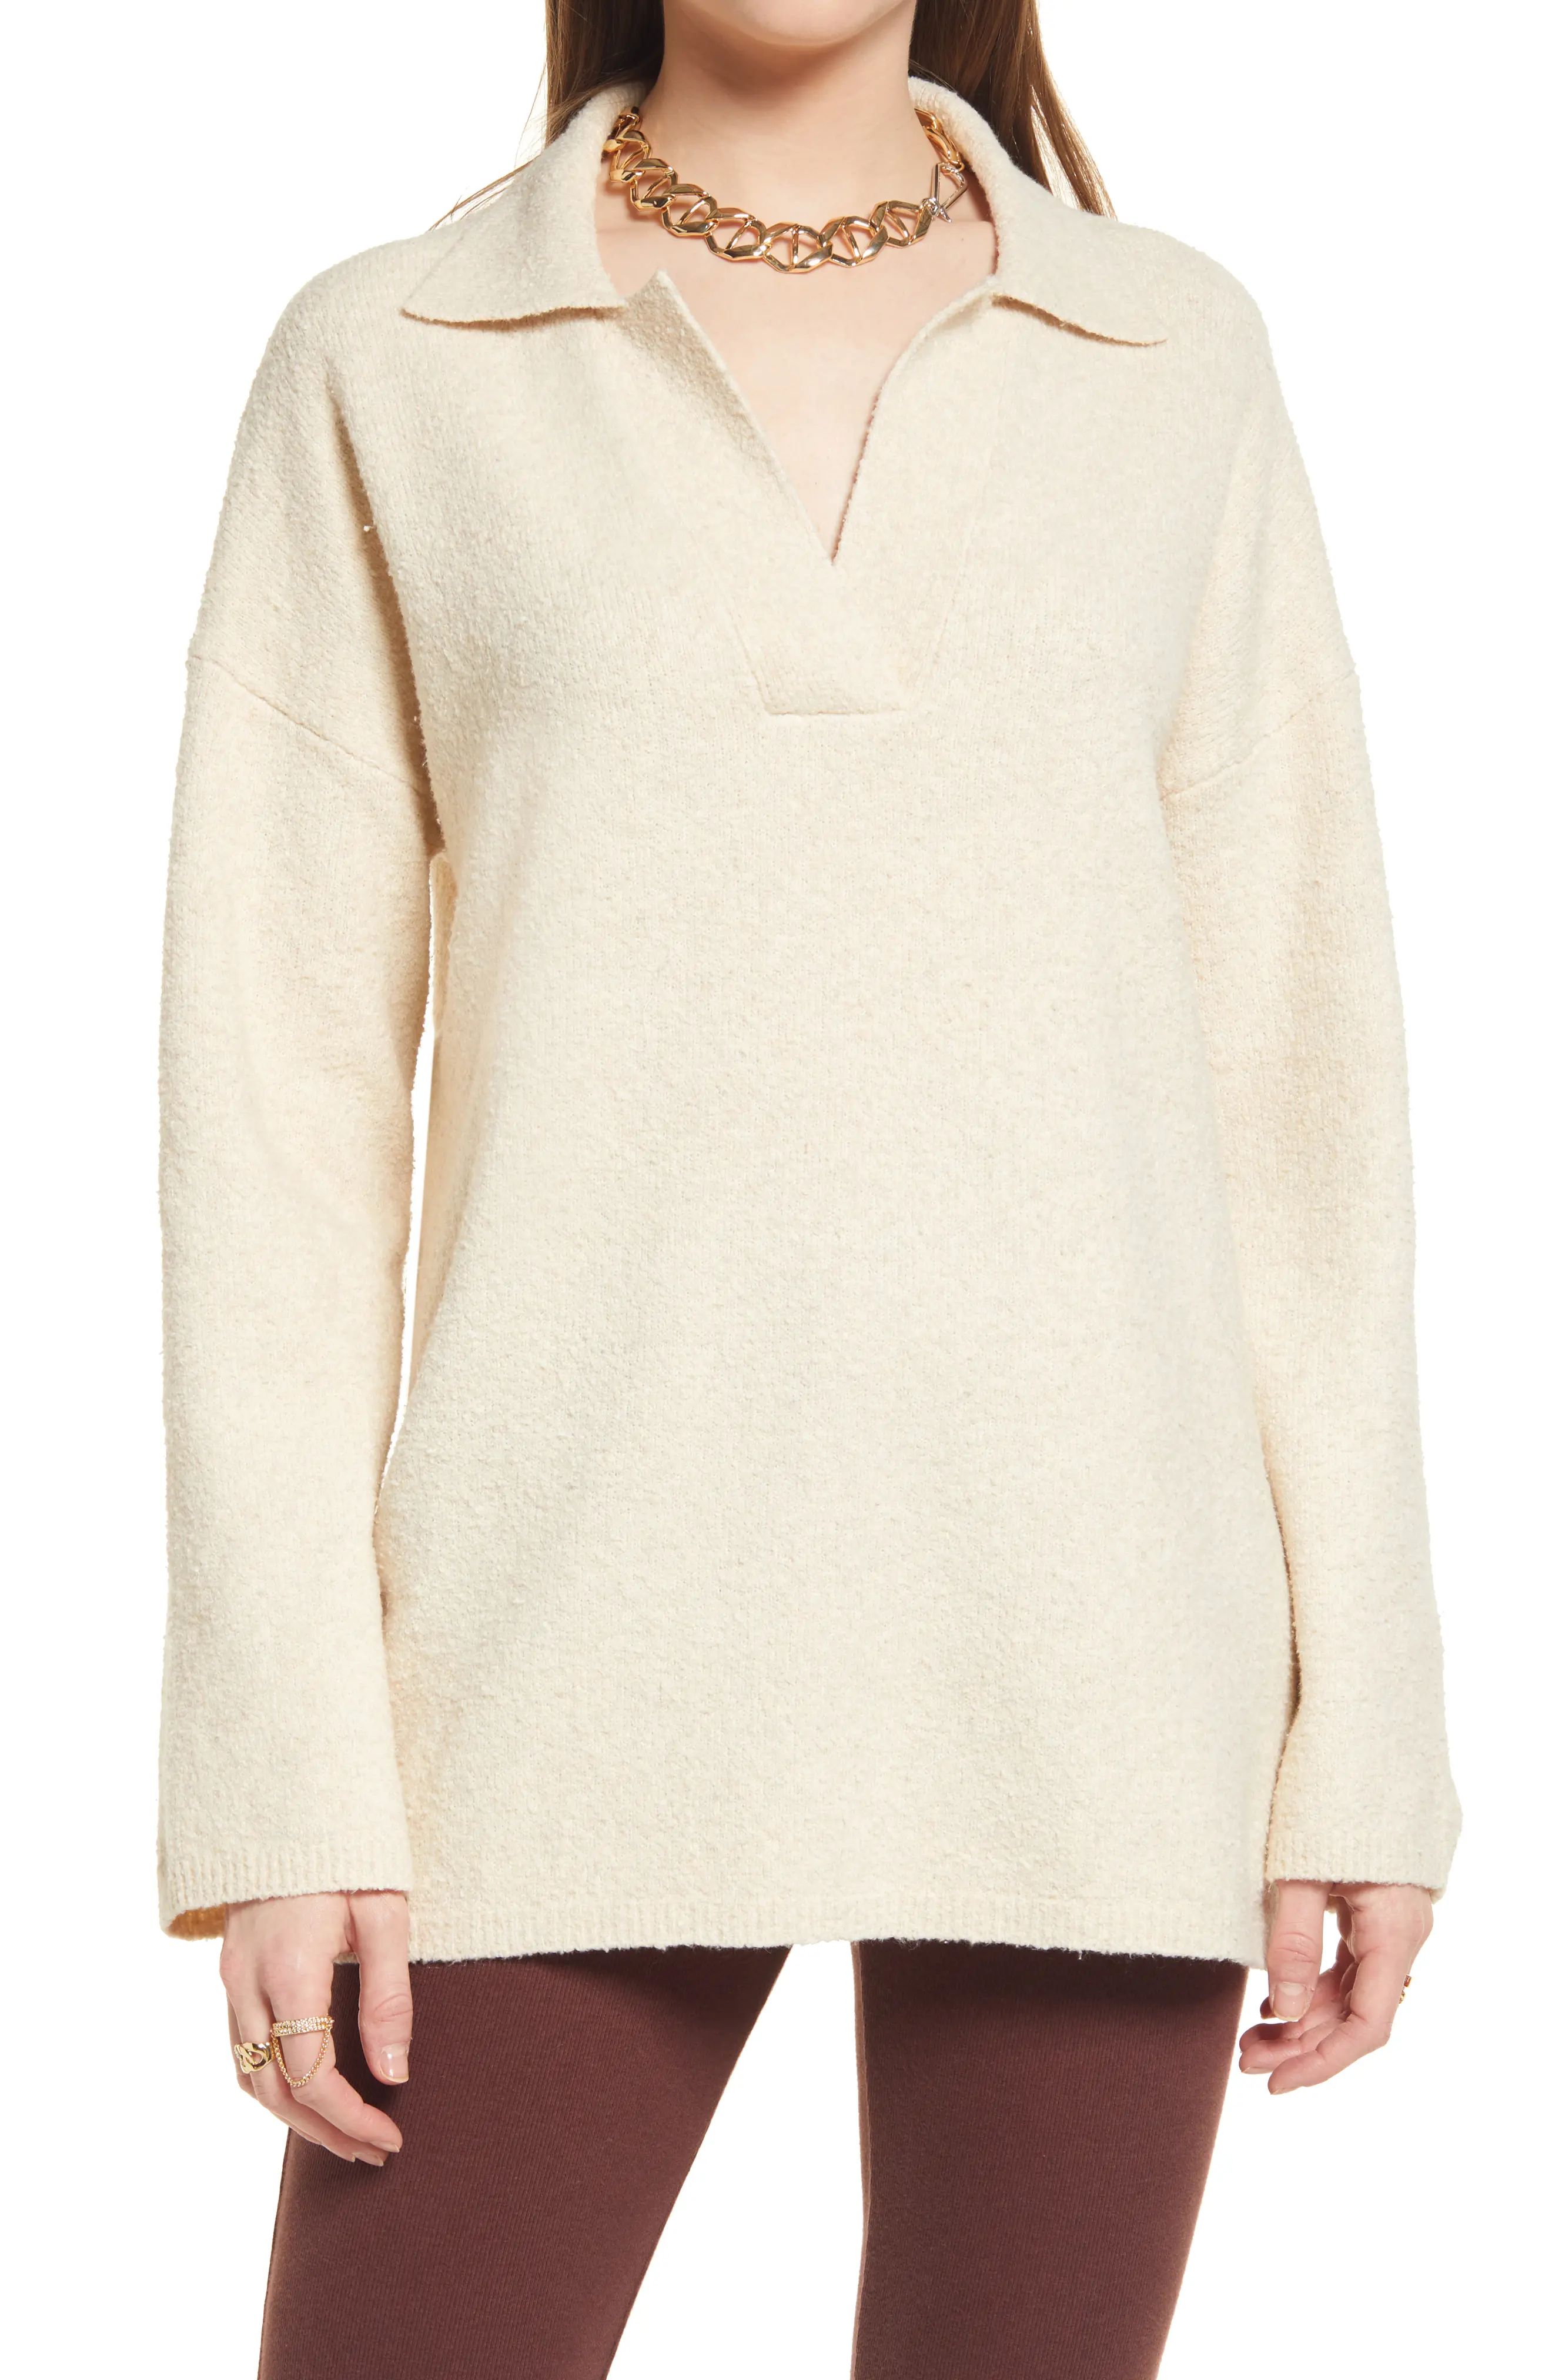 Open Edit Oversize Polo Sweater in Beige Oatmeal Light Heather at Nordstrom, Size Large | Nordstrom